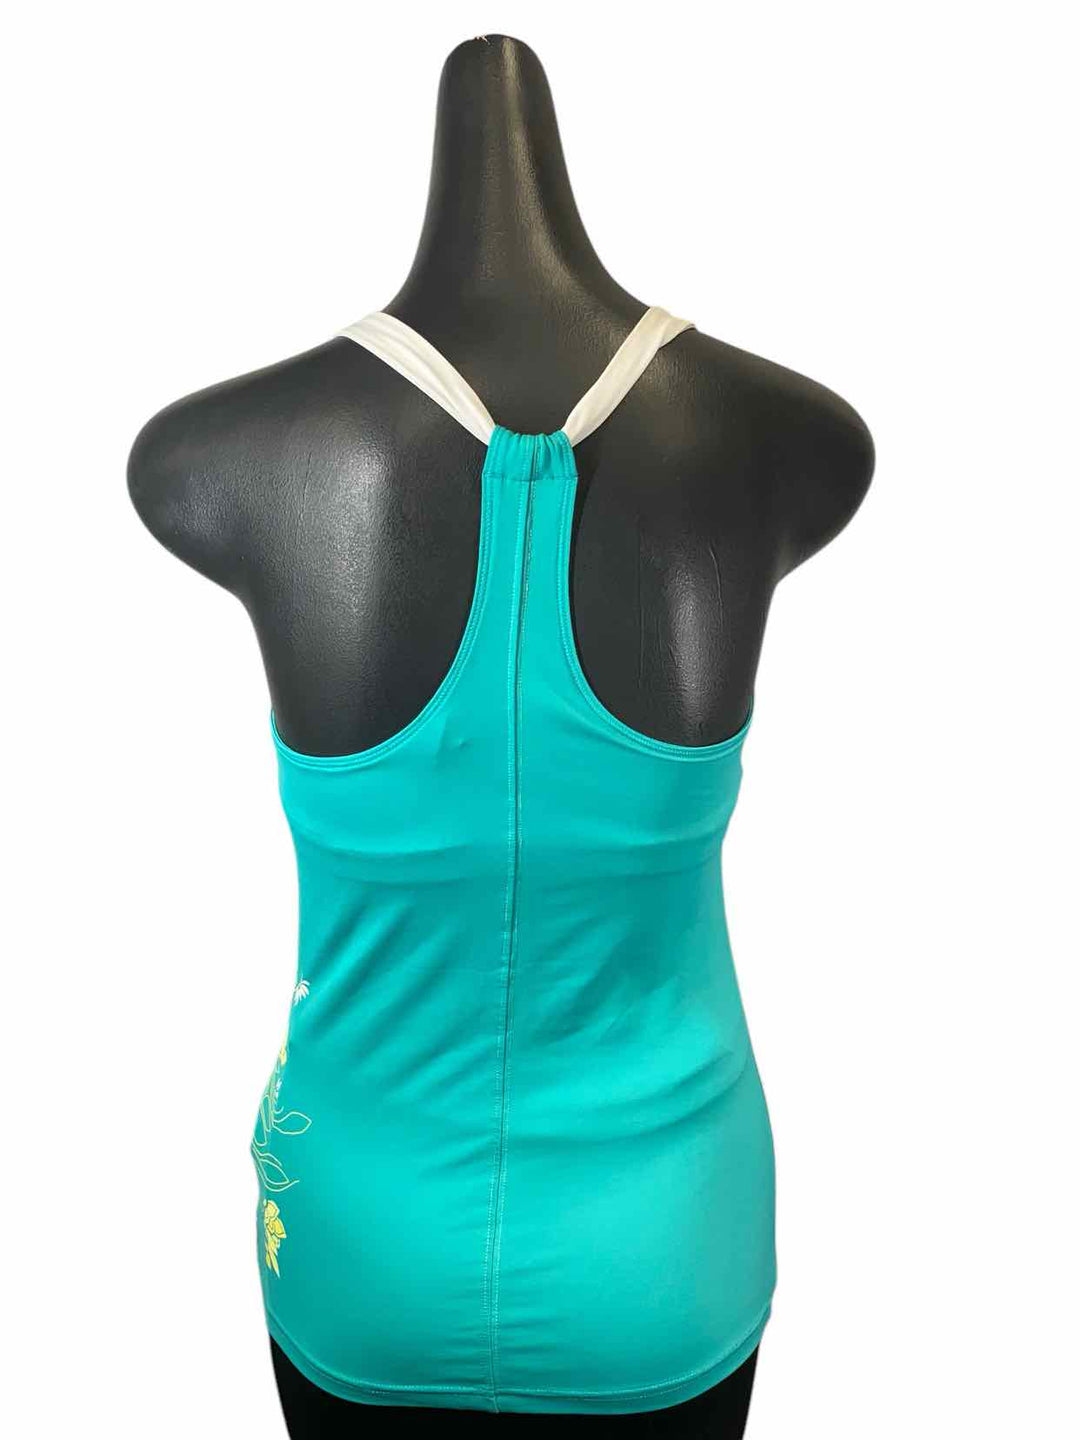 The North Face Size SP Teal Yellow Athletic Tank Top